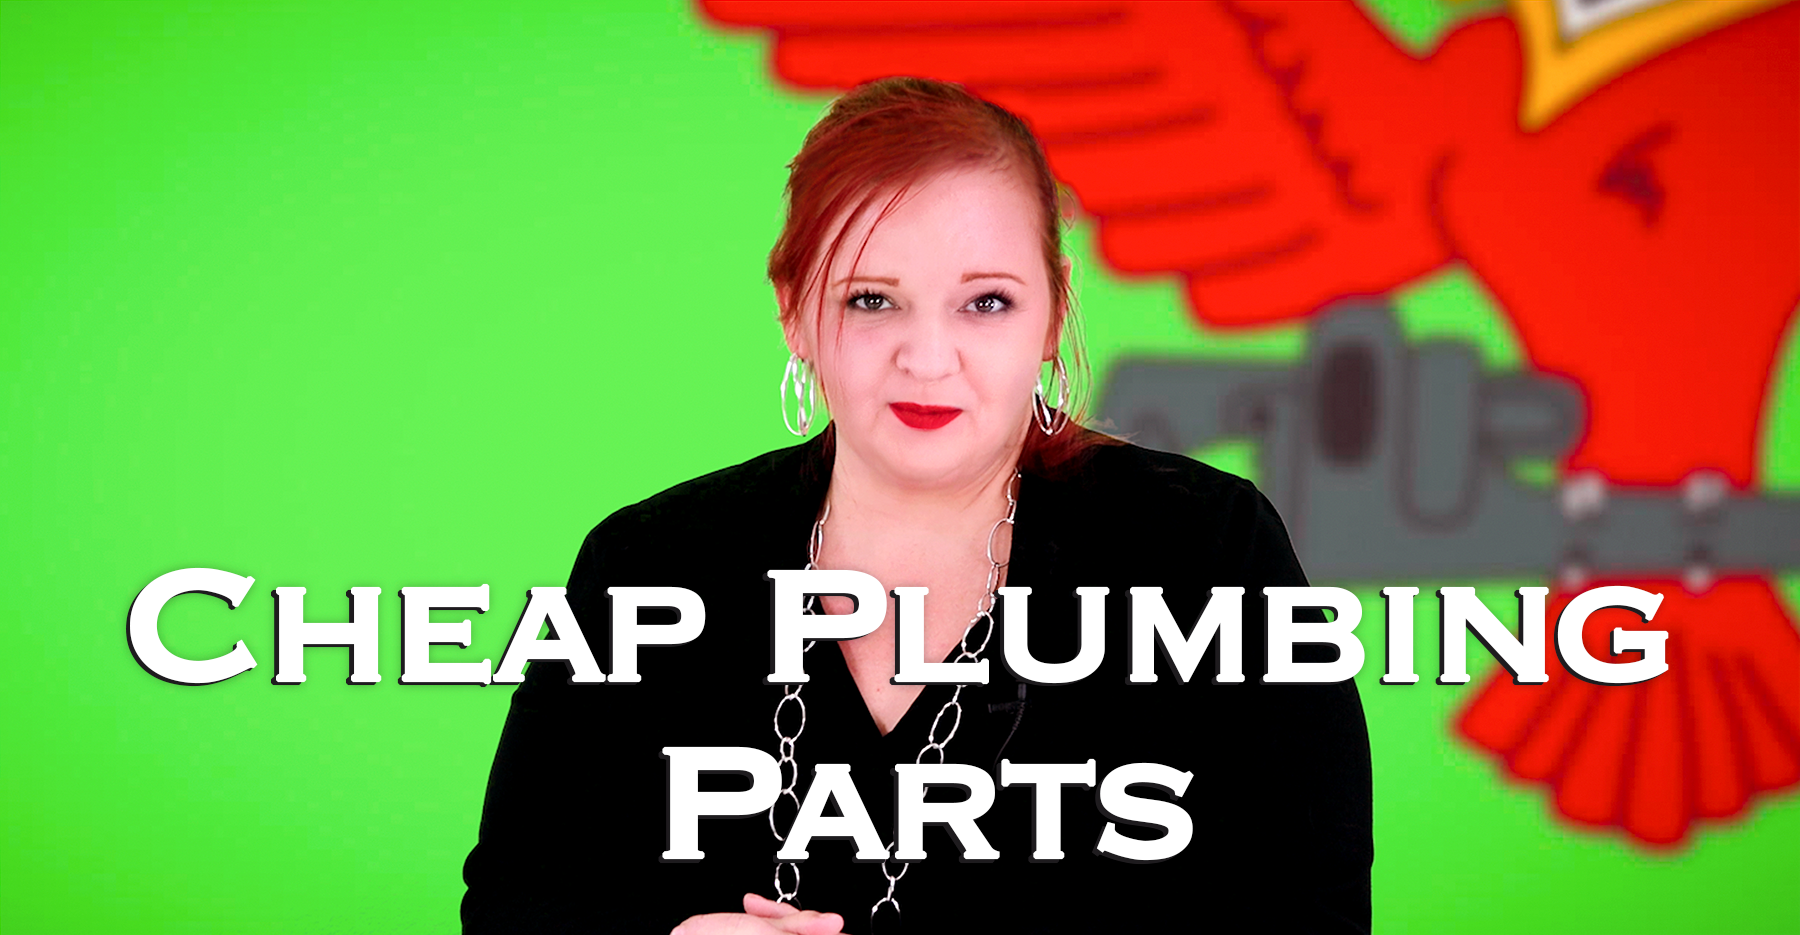 Cover photo for blog "Cheap Plumbing Parts"